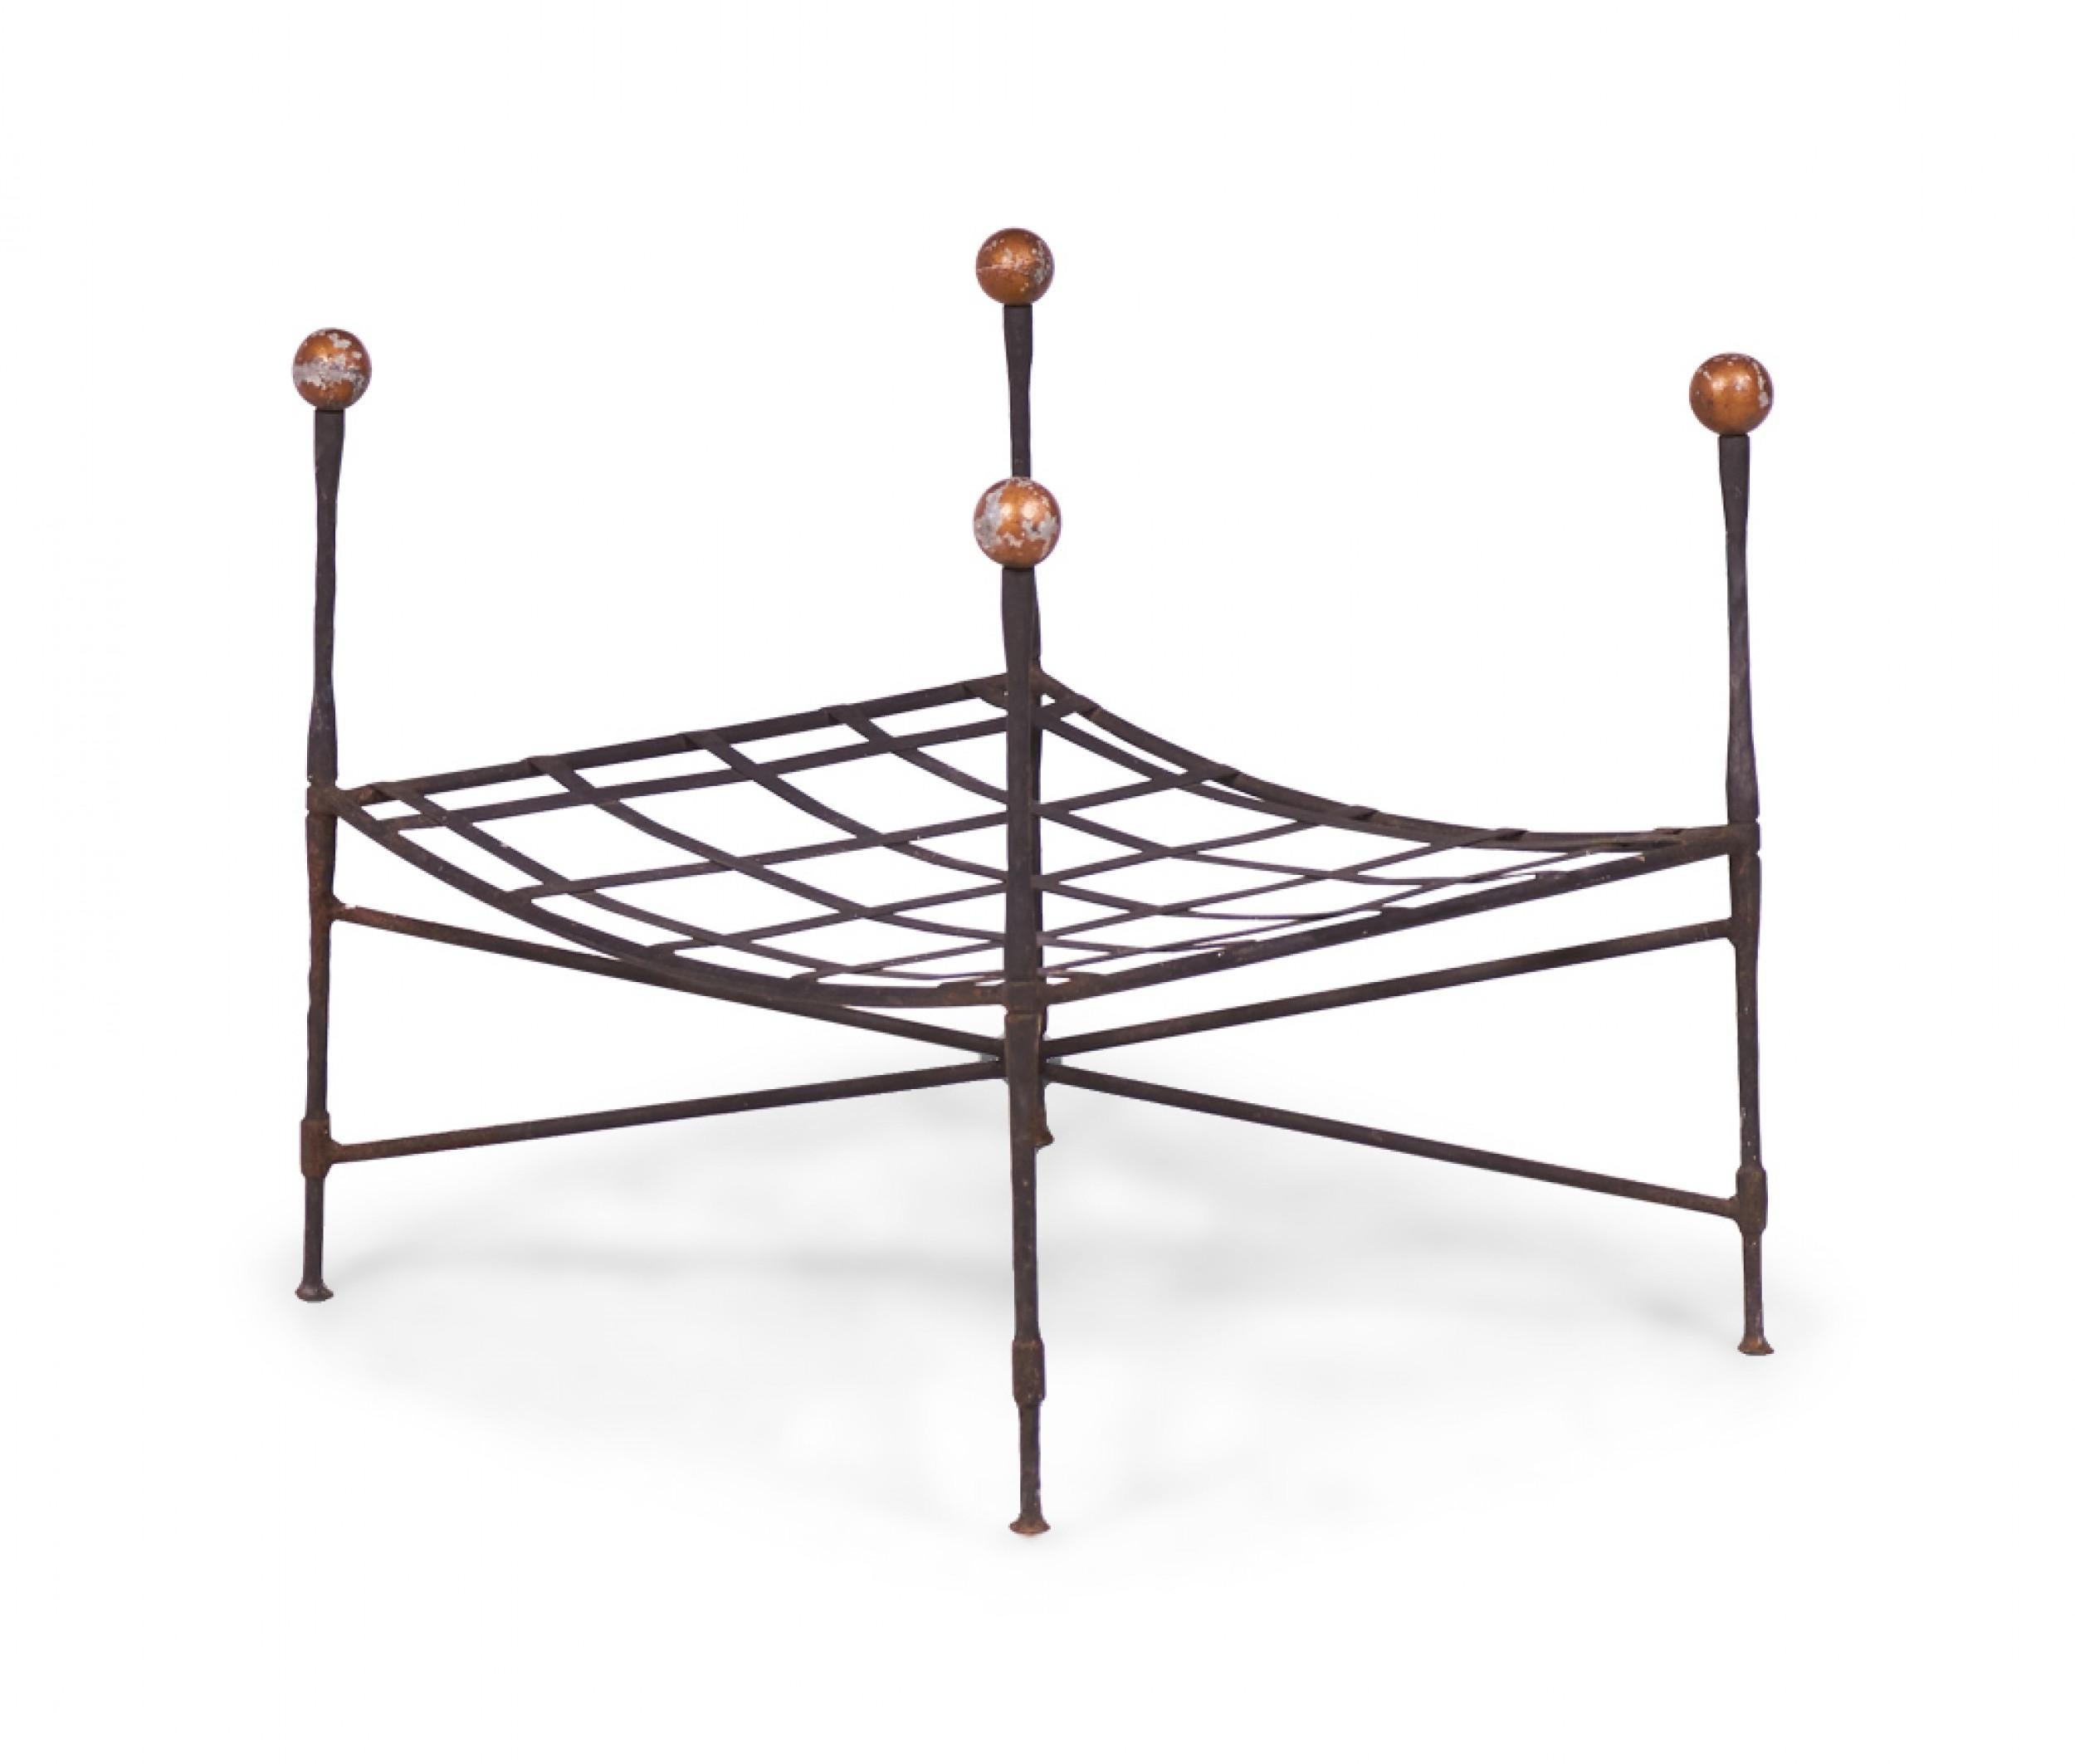 2 Pairs of American mid-century iron outdoor ottomans with a curved lattice structure supported by four posts topped with gilt ball finials and an x-base (missing cushions). (JOHN SALTERINI)(PRICED PER PAIR)
 